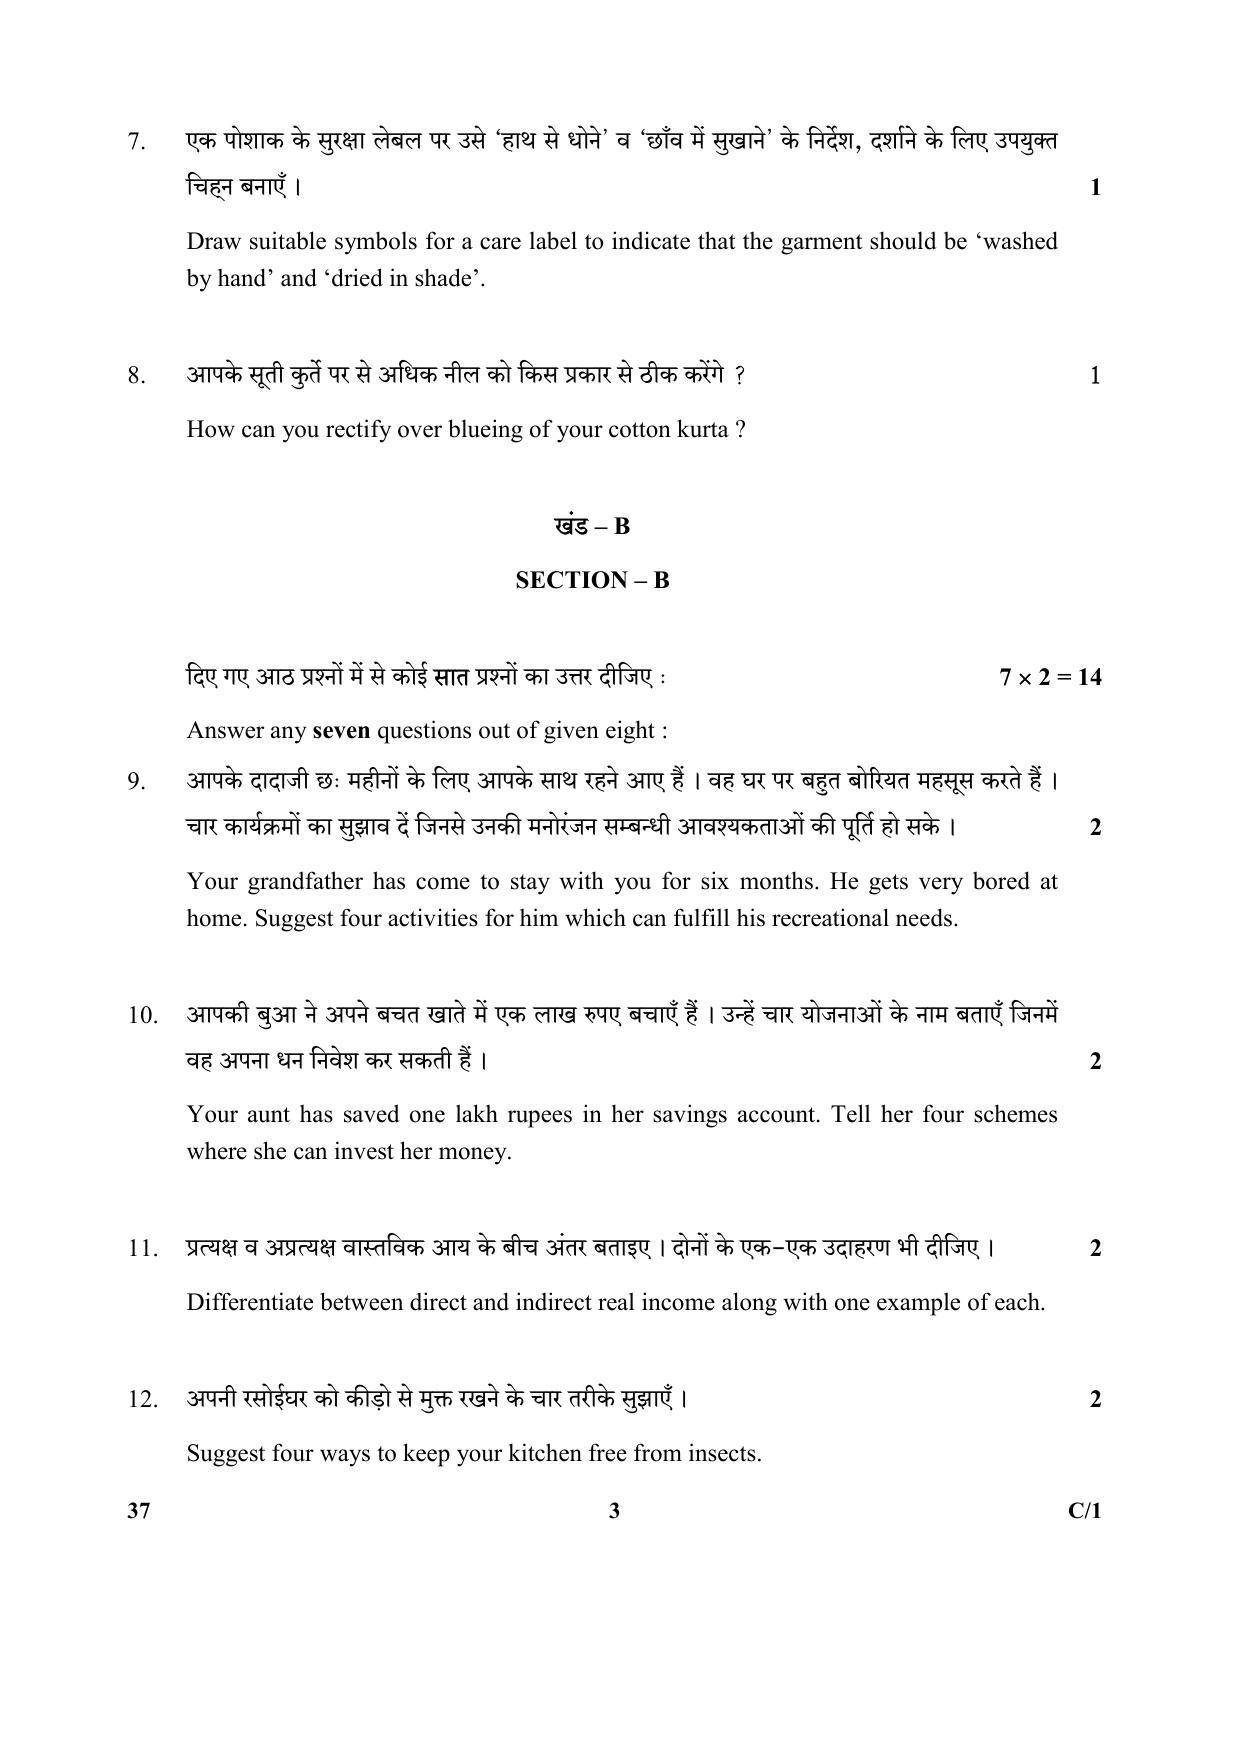 CBSE Class 10 37 (Home Science) 2018 Compartment Question Paper - Page 3